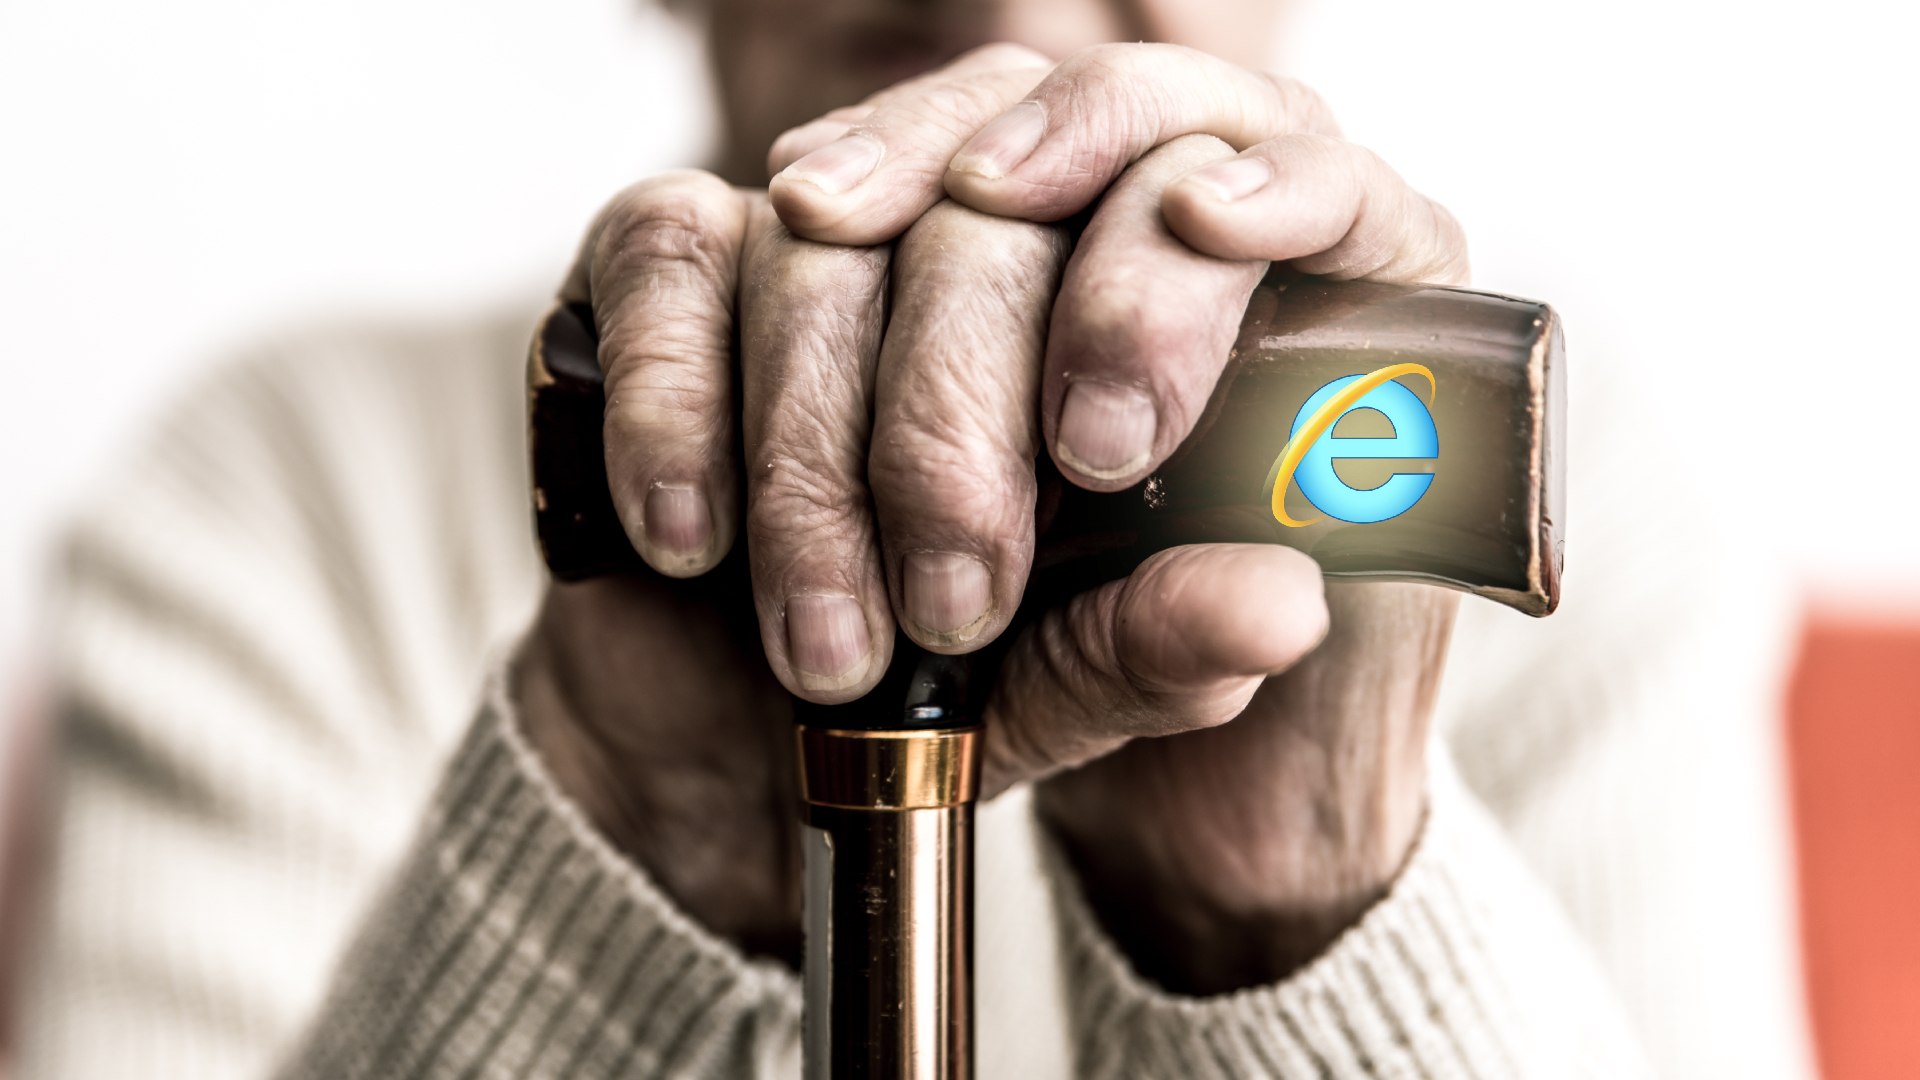 Microsoft Internet Explorer finally retires after 26 years